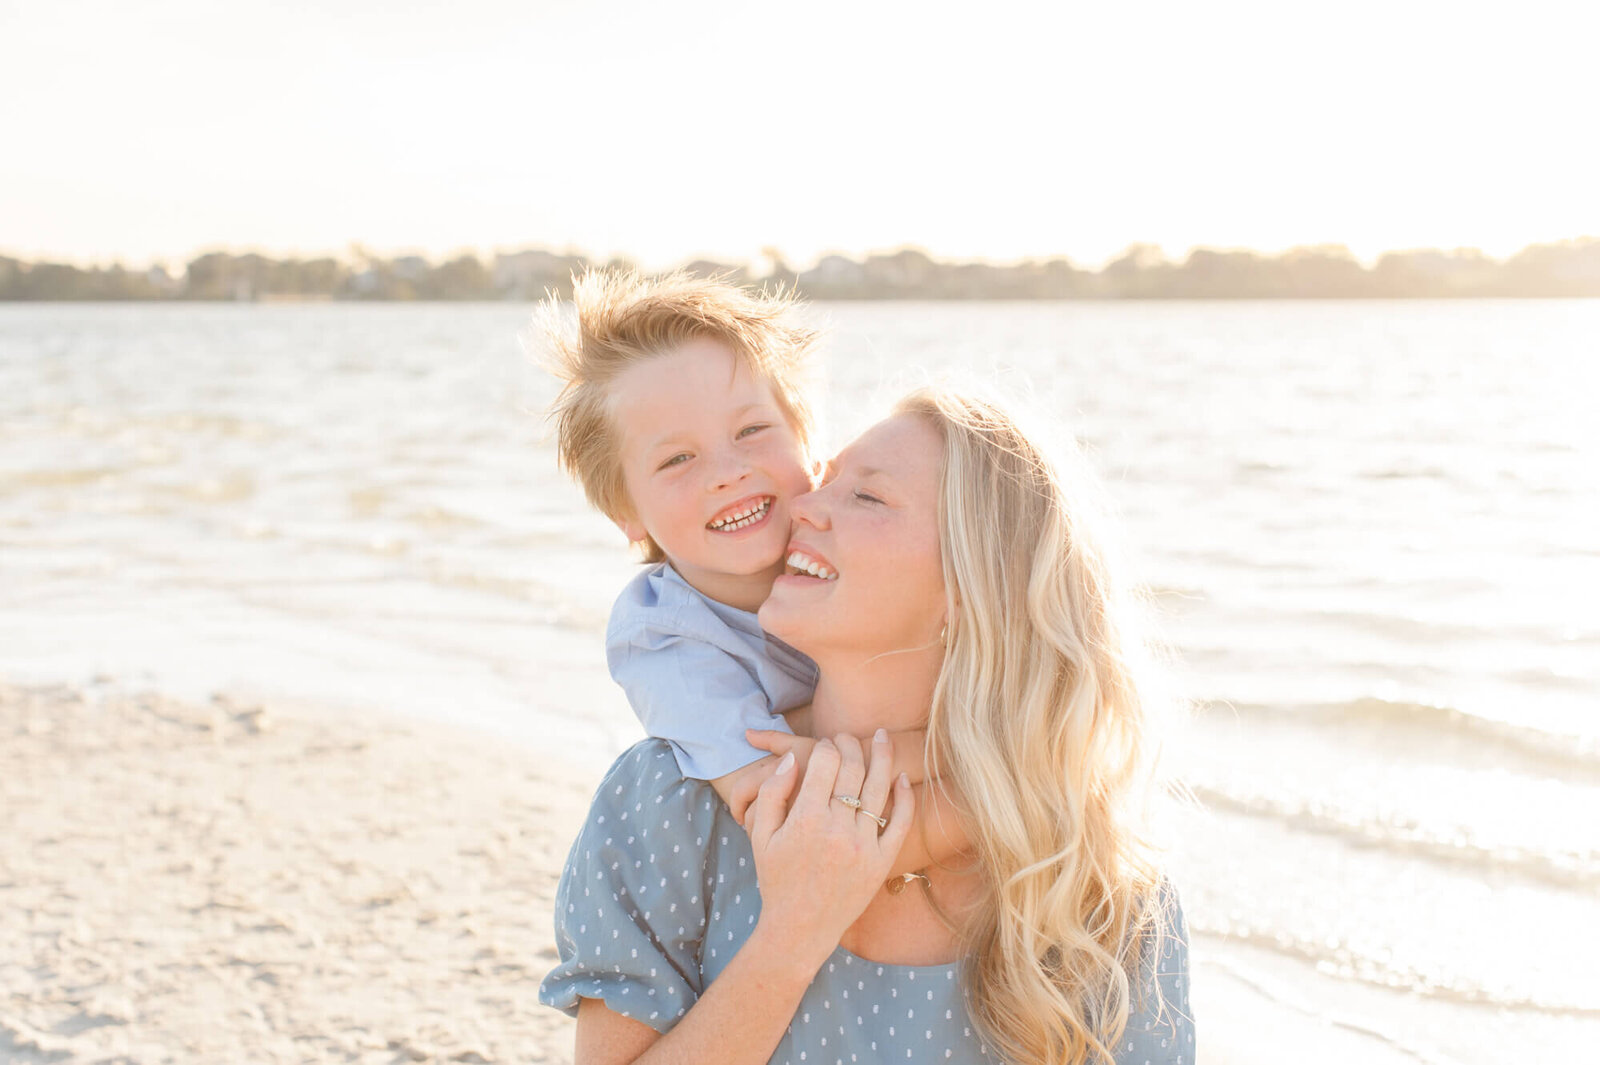 Son grasping mom from behind and laughing with a beautiful golden glow behind her